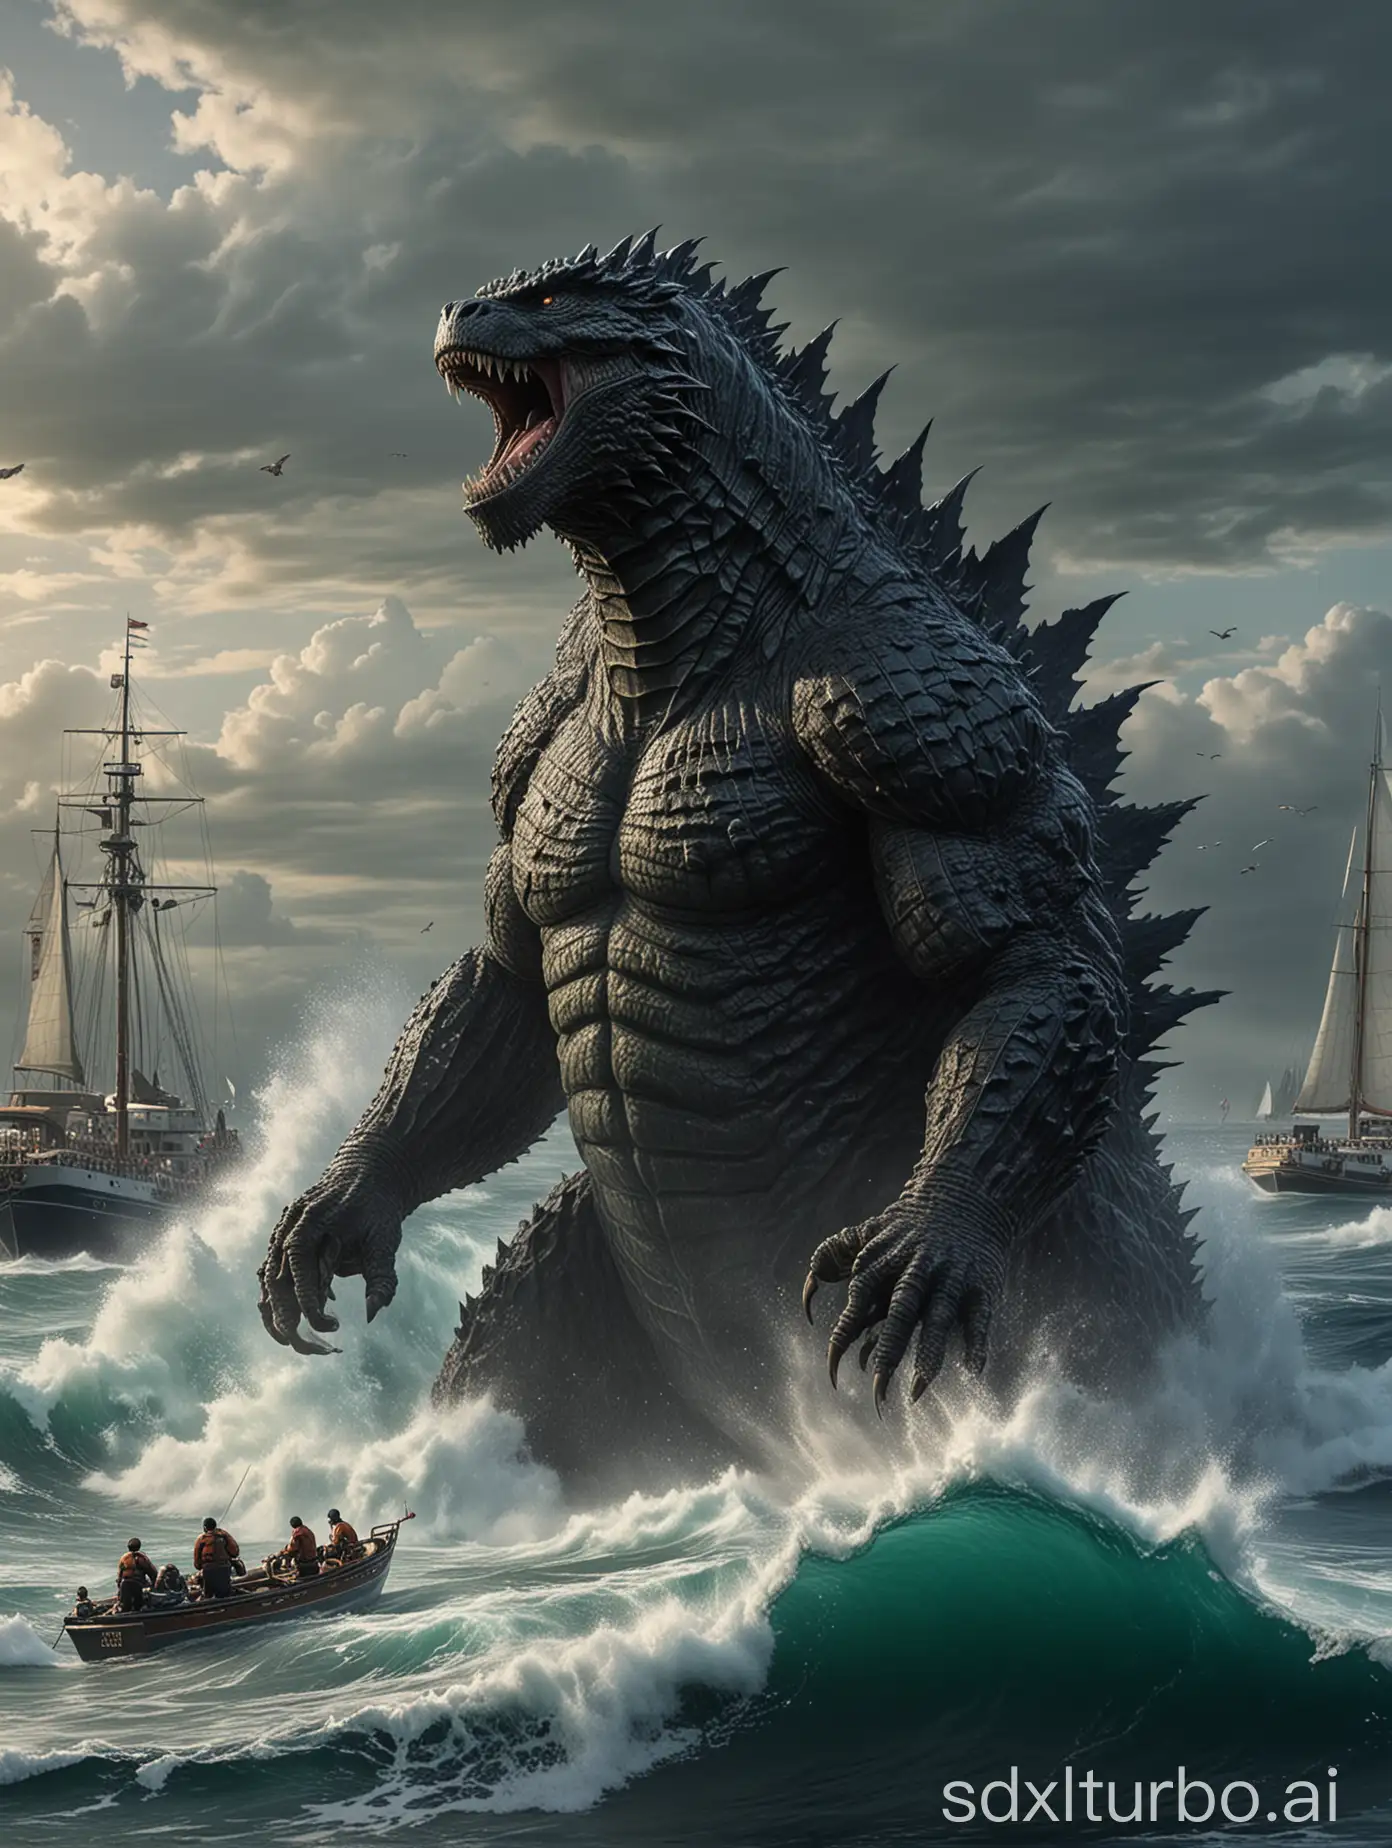 Majestic-Godzilla-Surrounded-by-Yachts-and-Small-Boats-Amidst-Raging-Waves